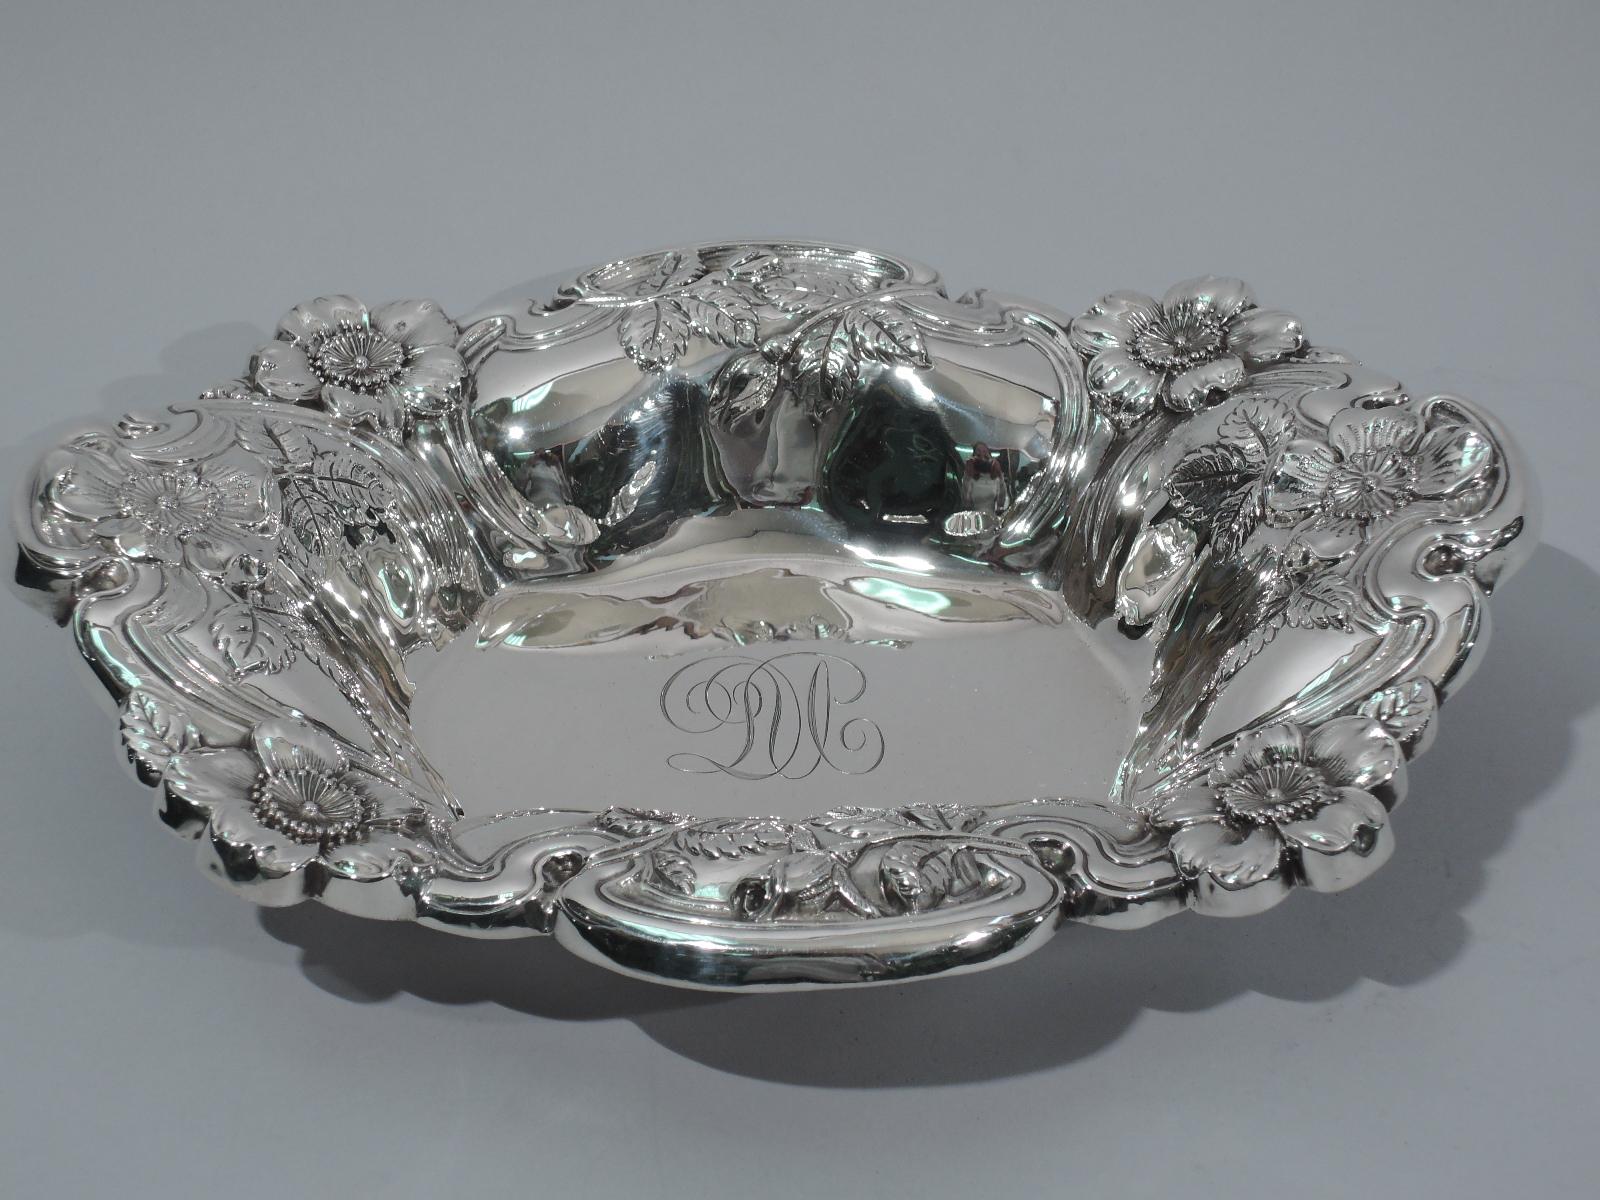 Turn-of-the-century American Art Nouveau sterling silver bowl. Scrolled and rectilinear well. Sides lobed and flared with irregular scrolled rim. Chased ornament comprising flowerheads overlapping whiplash frames. Interlaced script monogram engraved